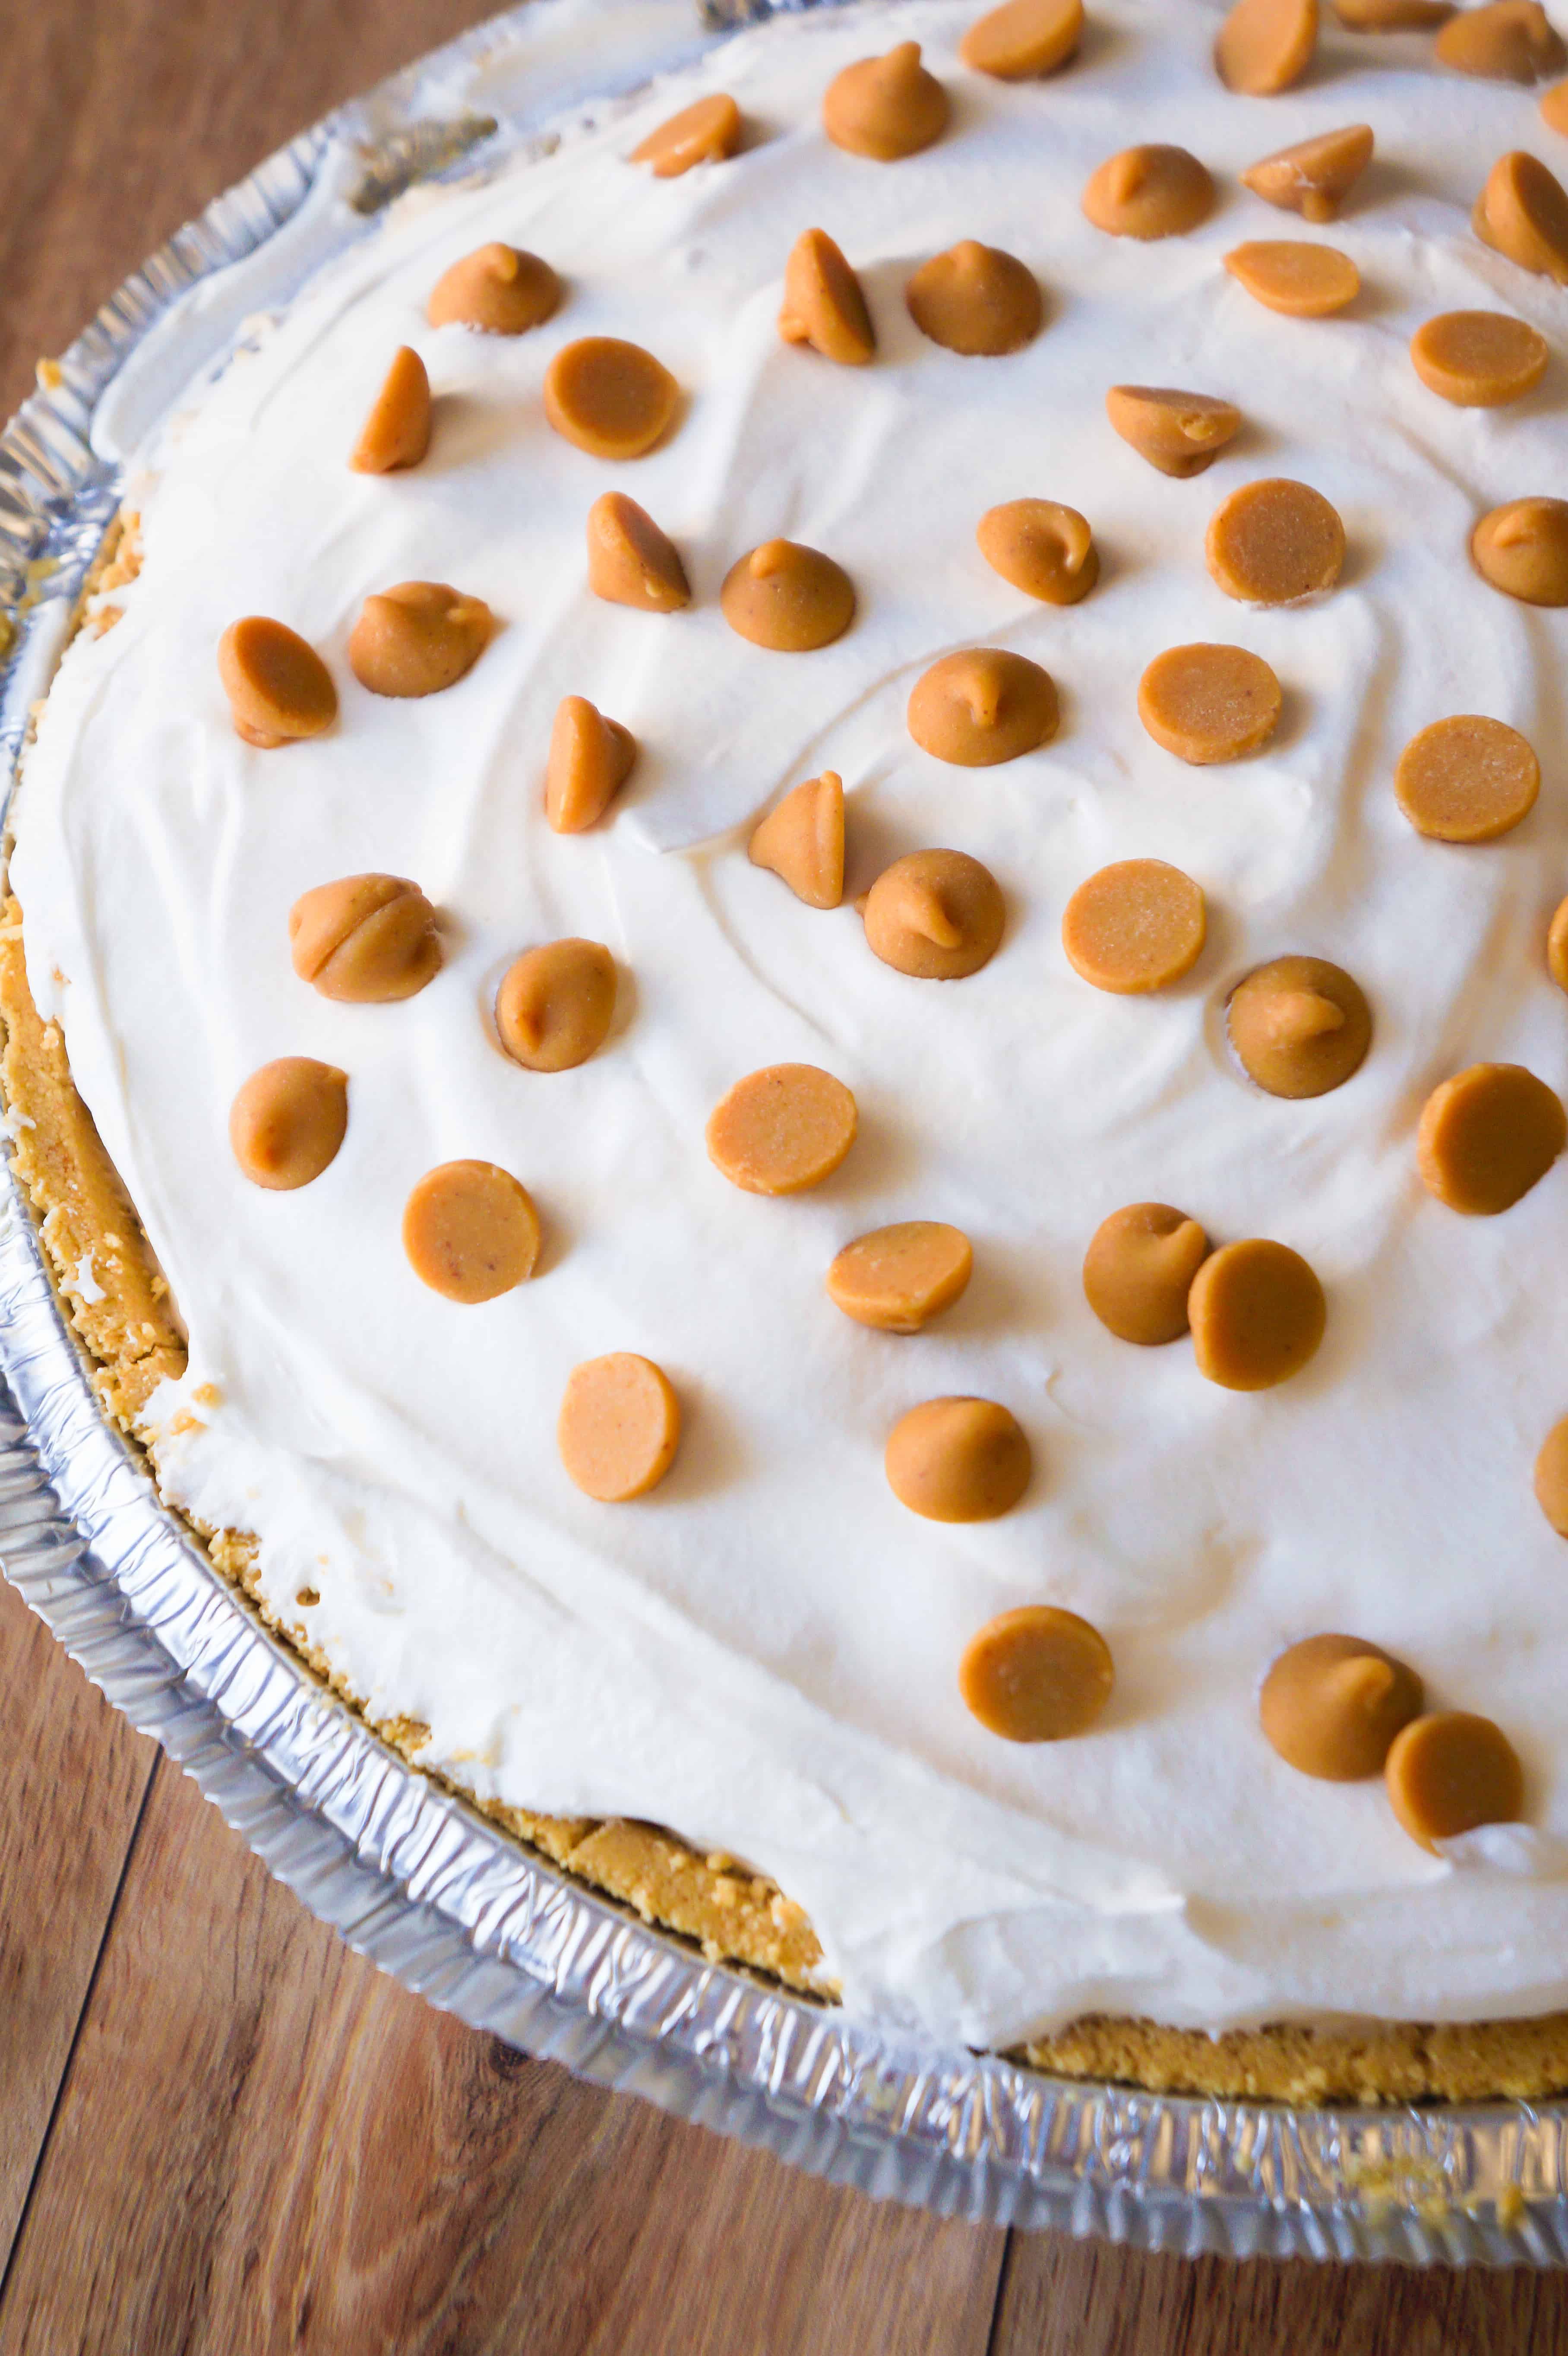 White Chocolate Peanut Butter Cup Pie is an easy no bake dessert recipe. This peanut butter dessert recipe uses instant pudding and a store bought pie crust.